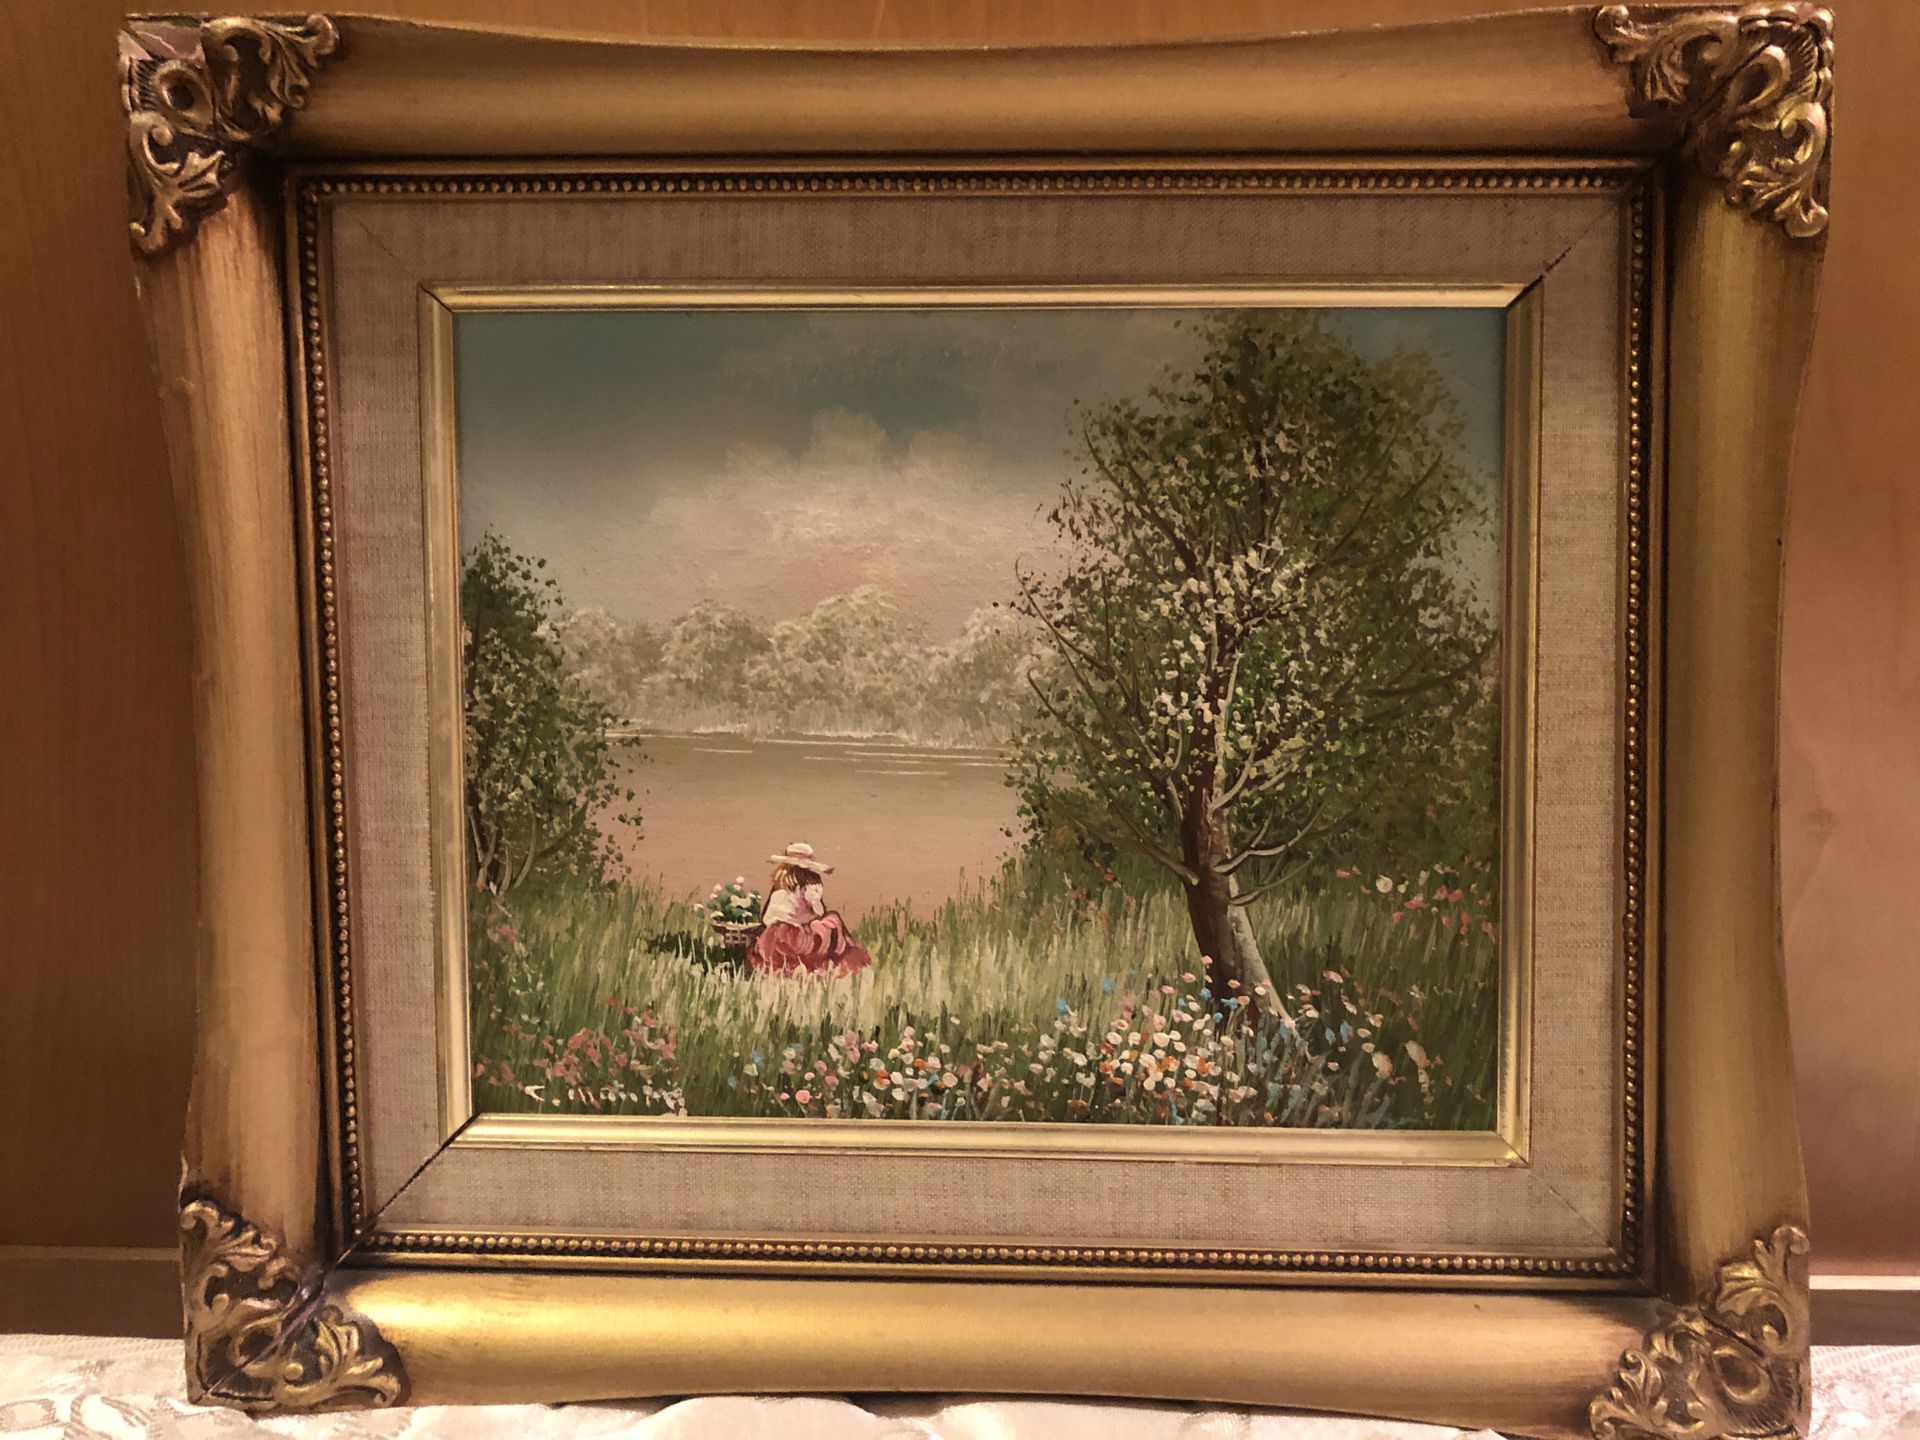 Wood - Framed oil painting on canvas of a girl by a lake